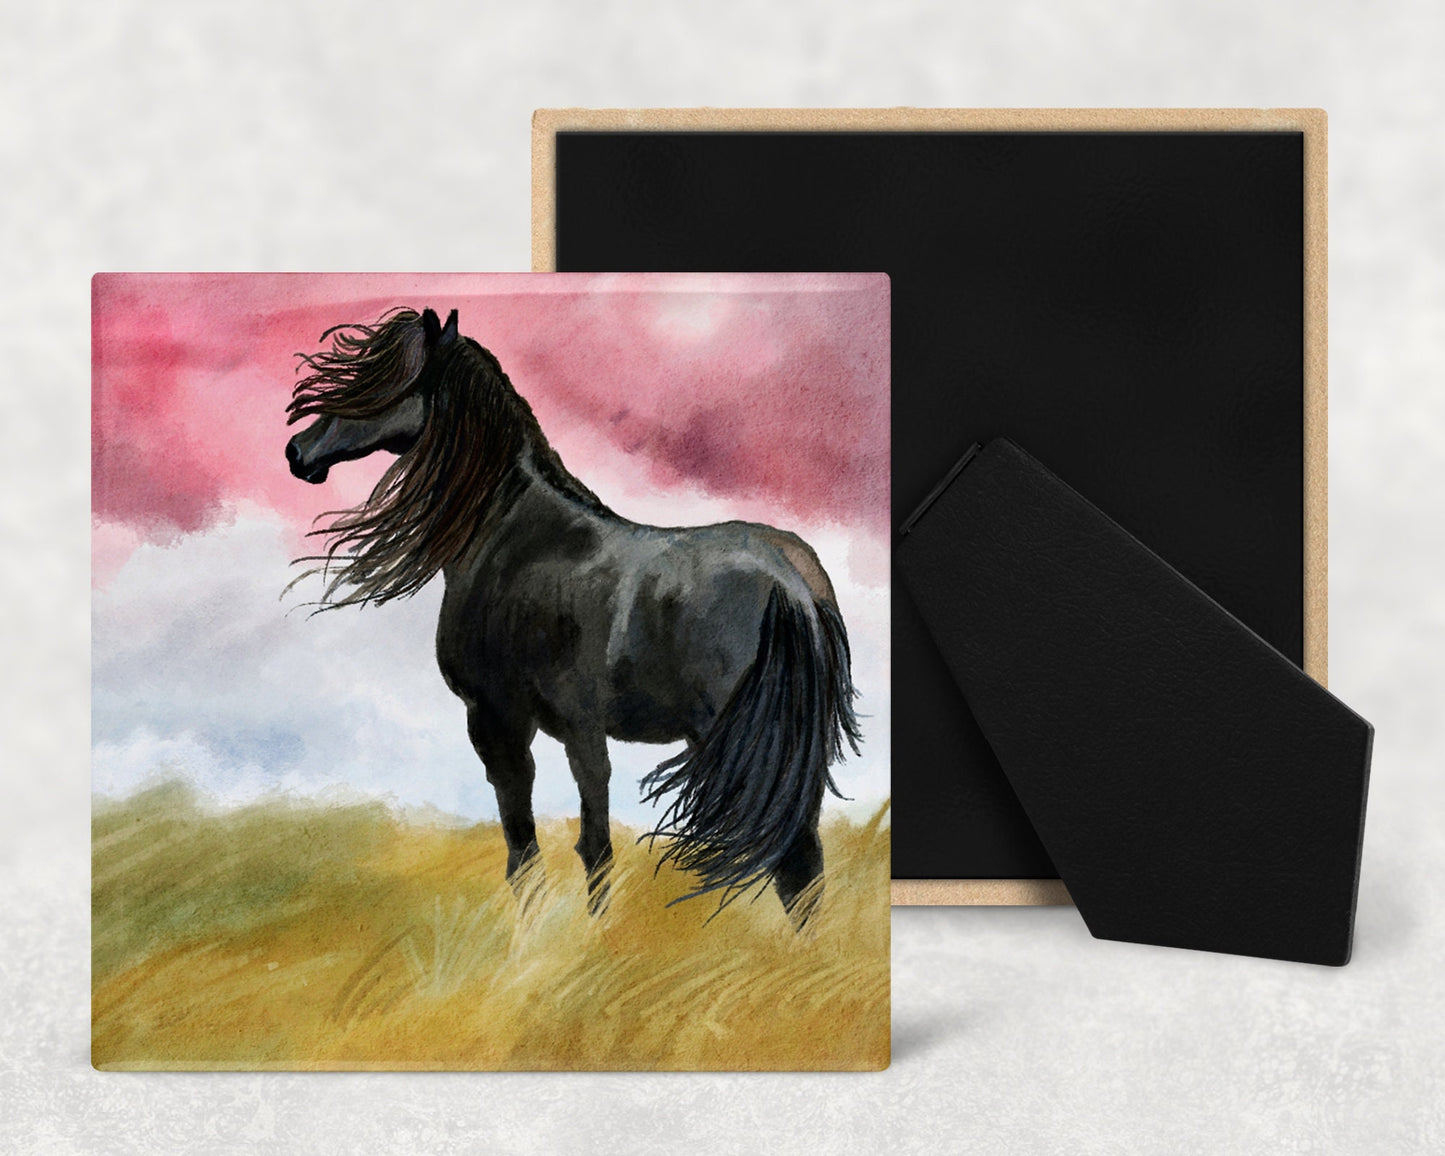 Black Horse Art Decorative Ceramic Tile with Optional Easel Back - Available in 3 Sizes